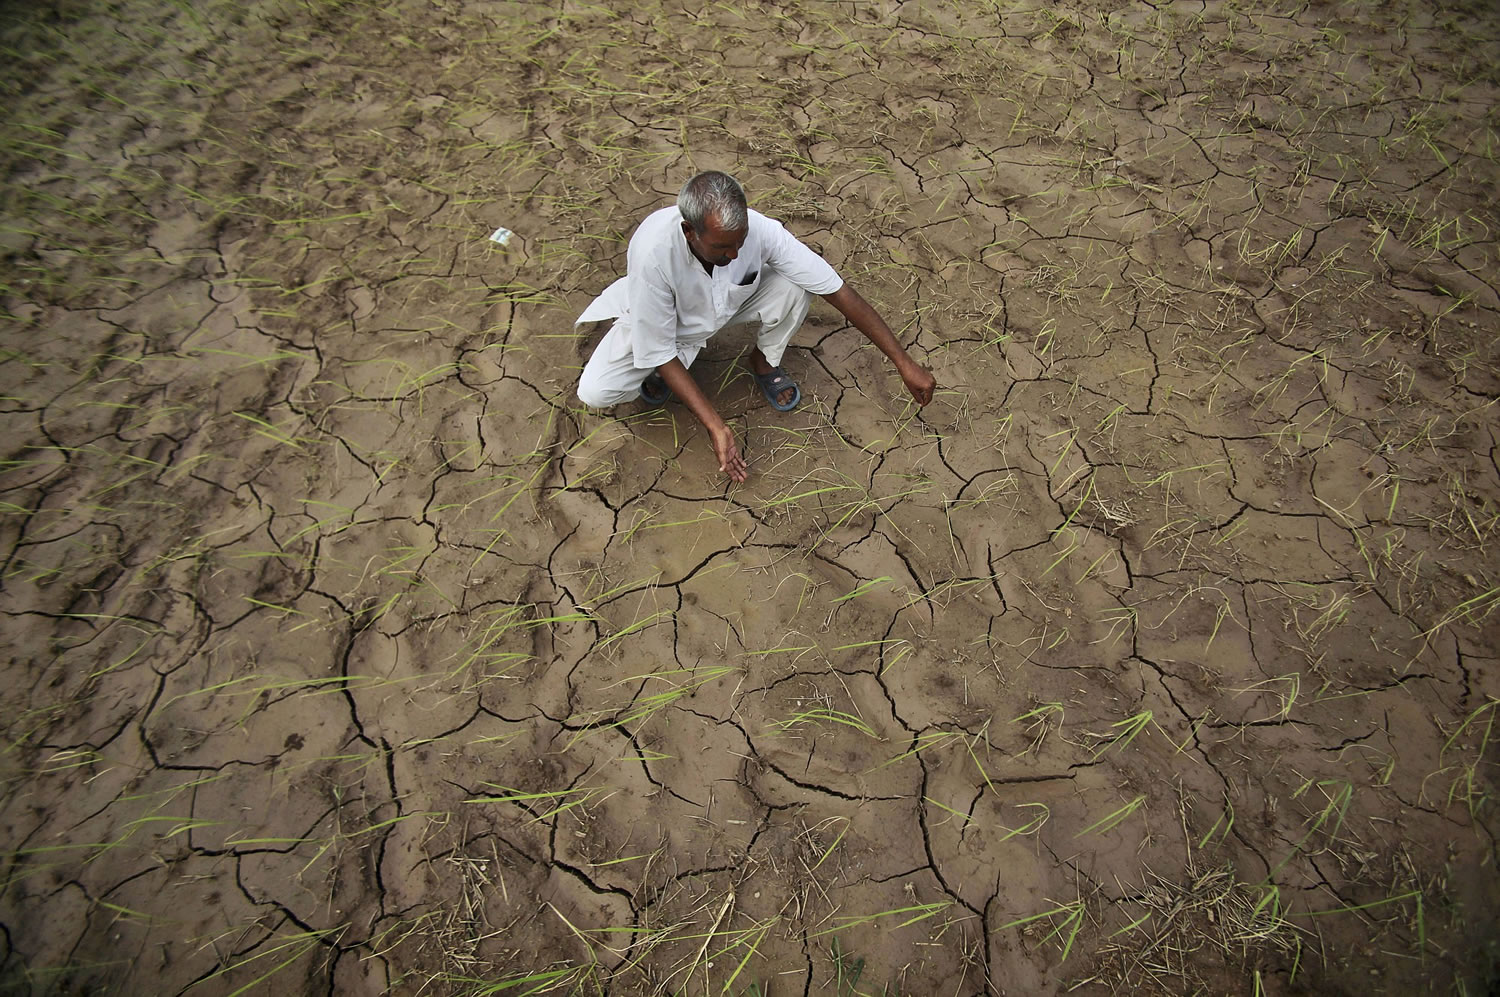 Associated Press files
An Indian farmer sits in a dry, cracked paddy field in Ranbir Singh Pura, India, in 2012.